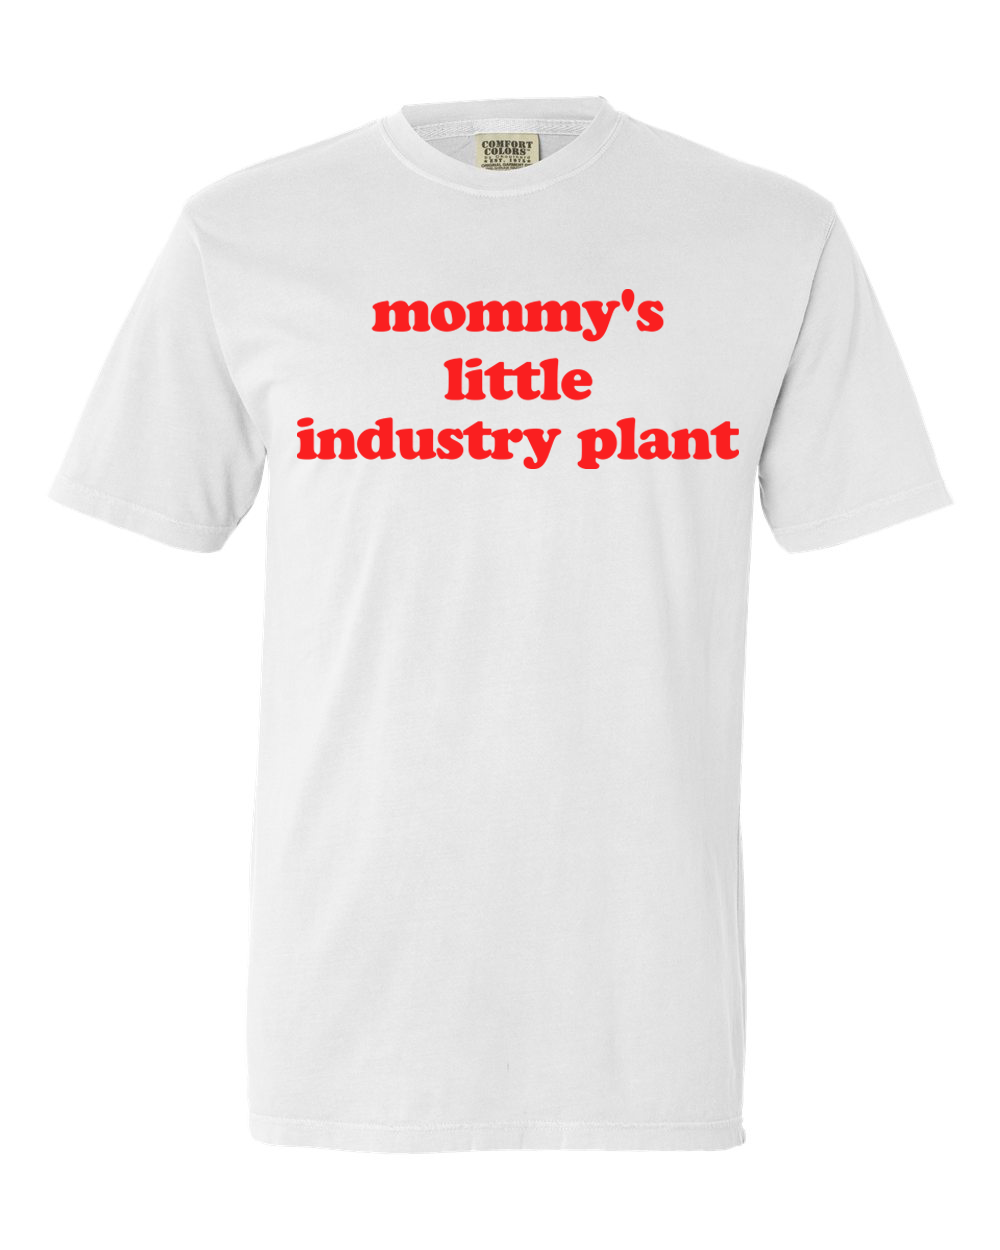 mommy's little industry plant tee